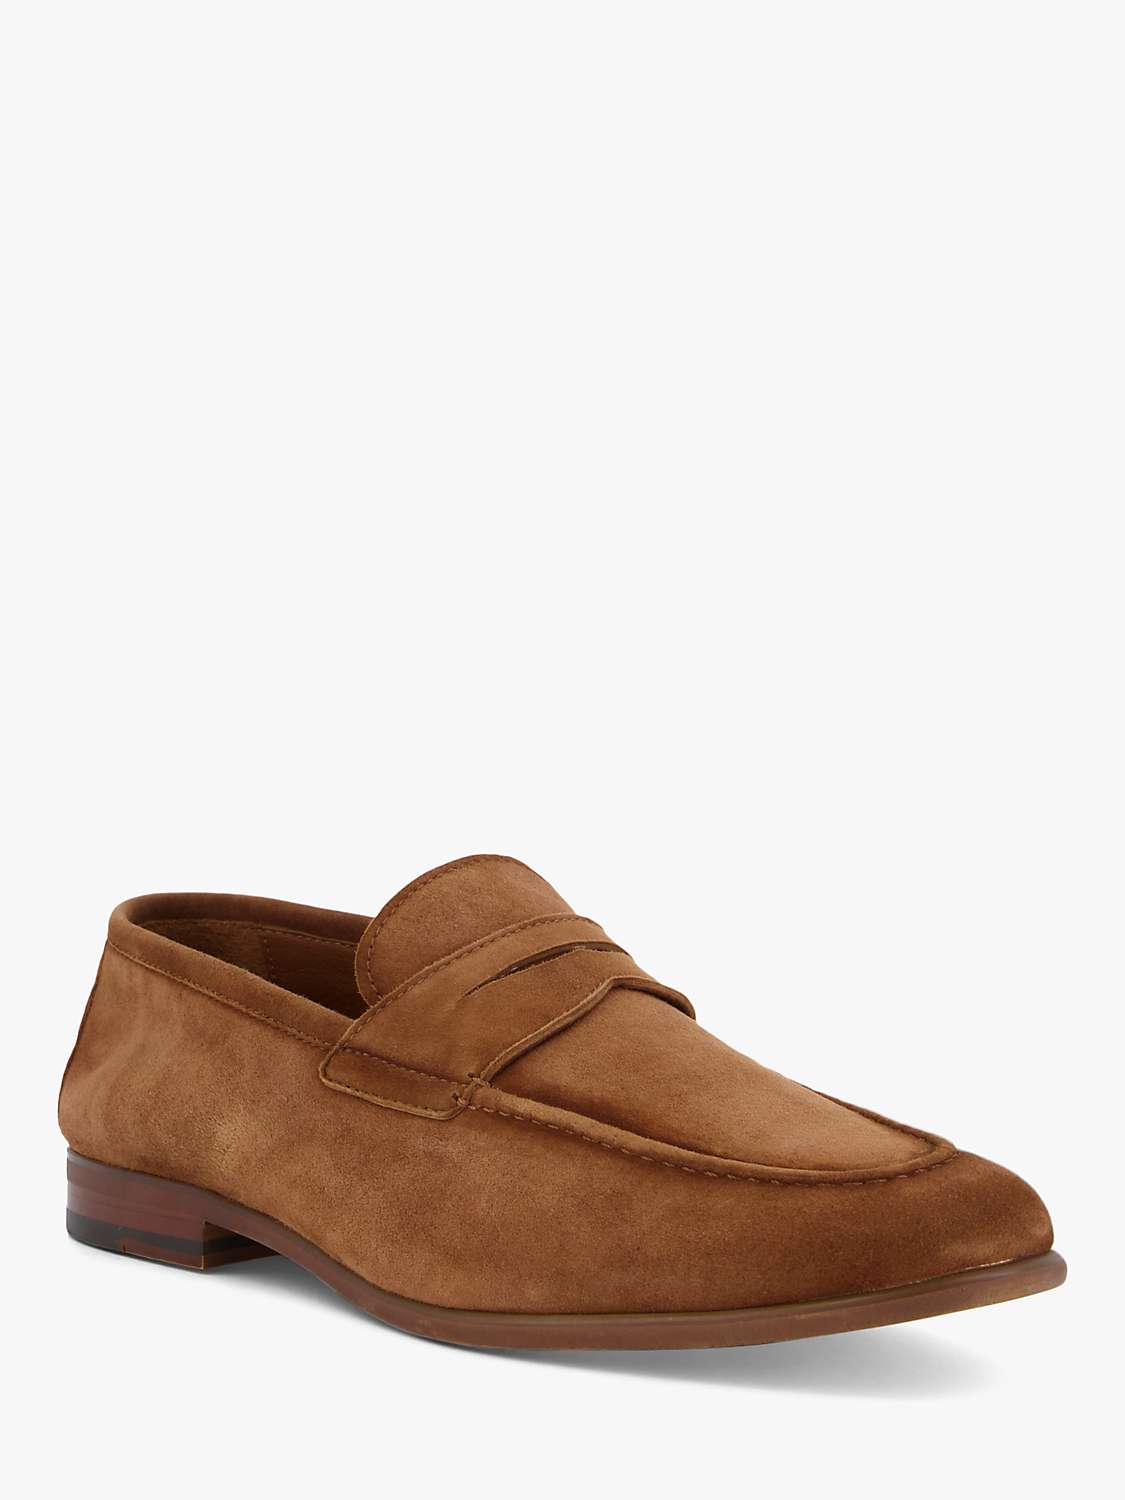 Dune Surreyy Washed Suede Loafers, Tan at John Lewis & Partners